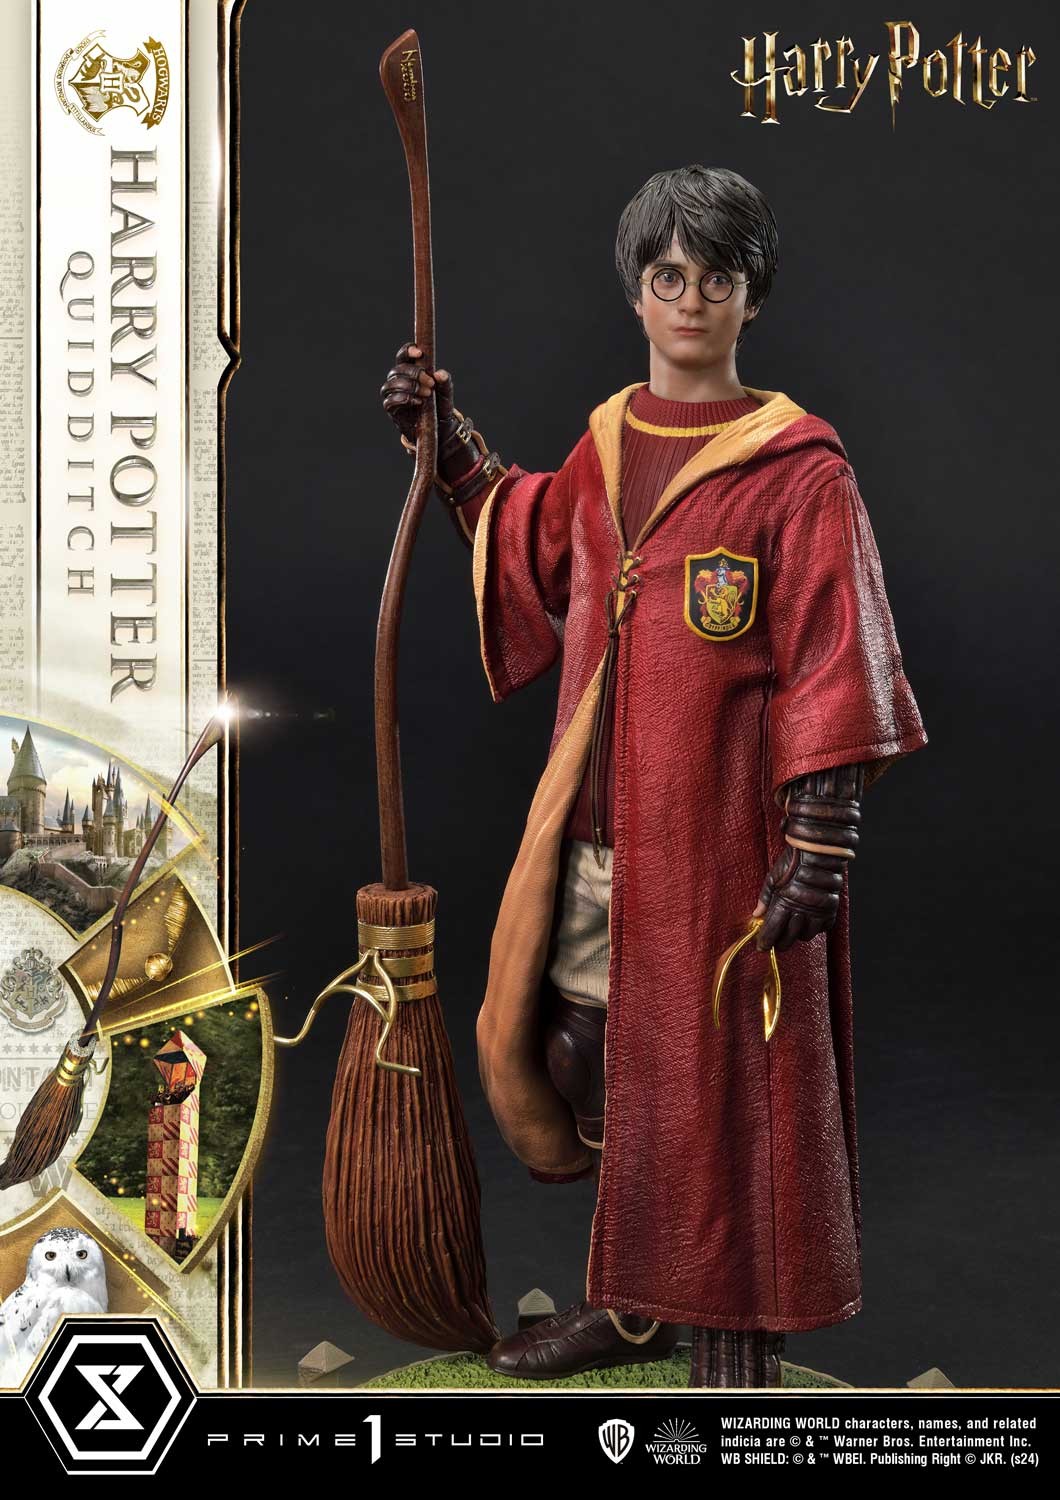 Harry Potter (Quidditch Edition) (Prototype Shown) View 23